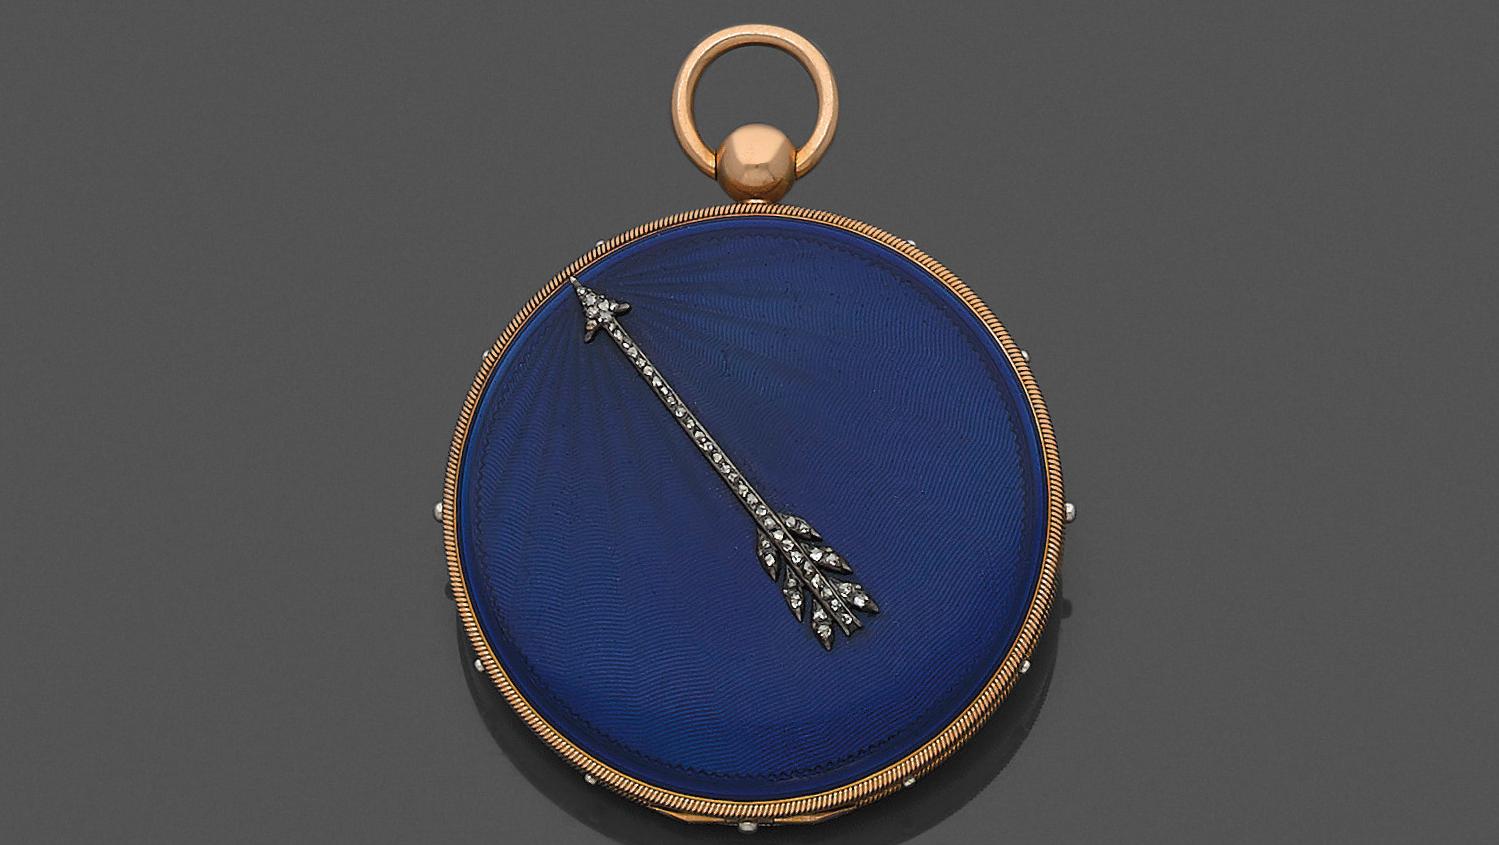 Abraham-Louis Breguet (1747-1823), "subscription tact watch", gold and royal blue... A Gem of a Watch by Breguet with a Distinguished Provenance